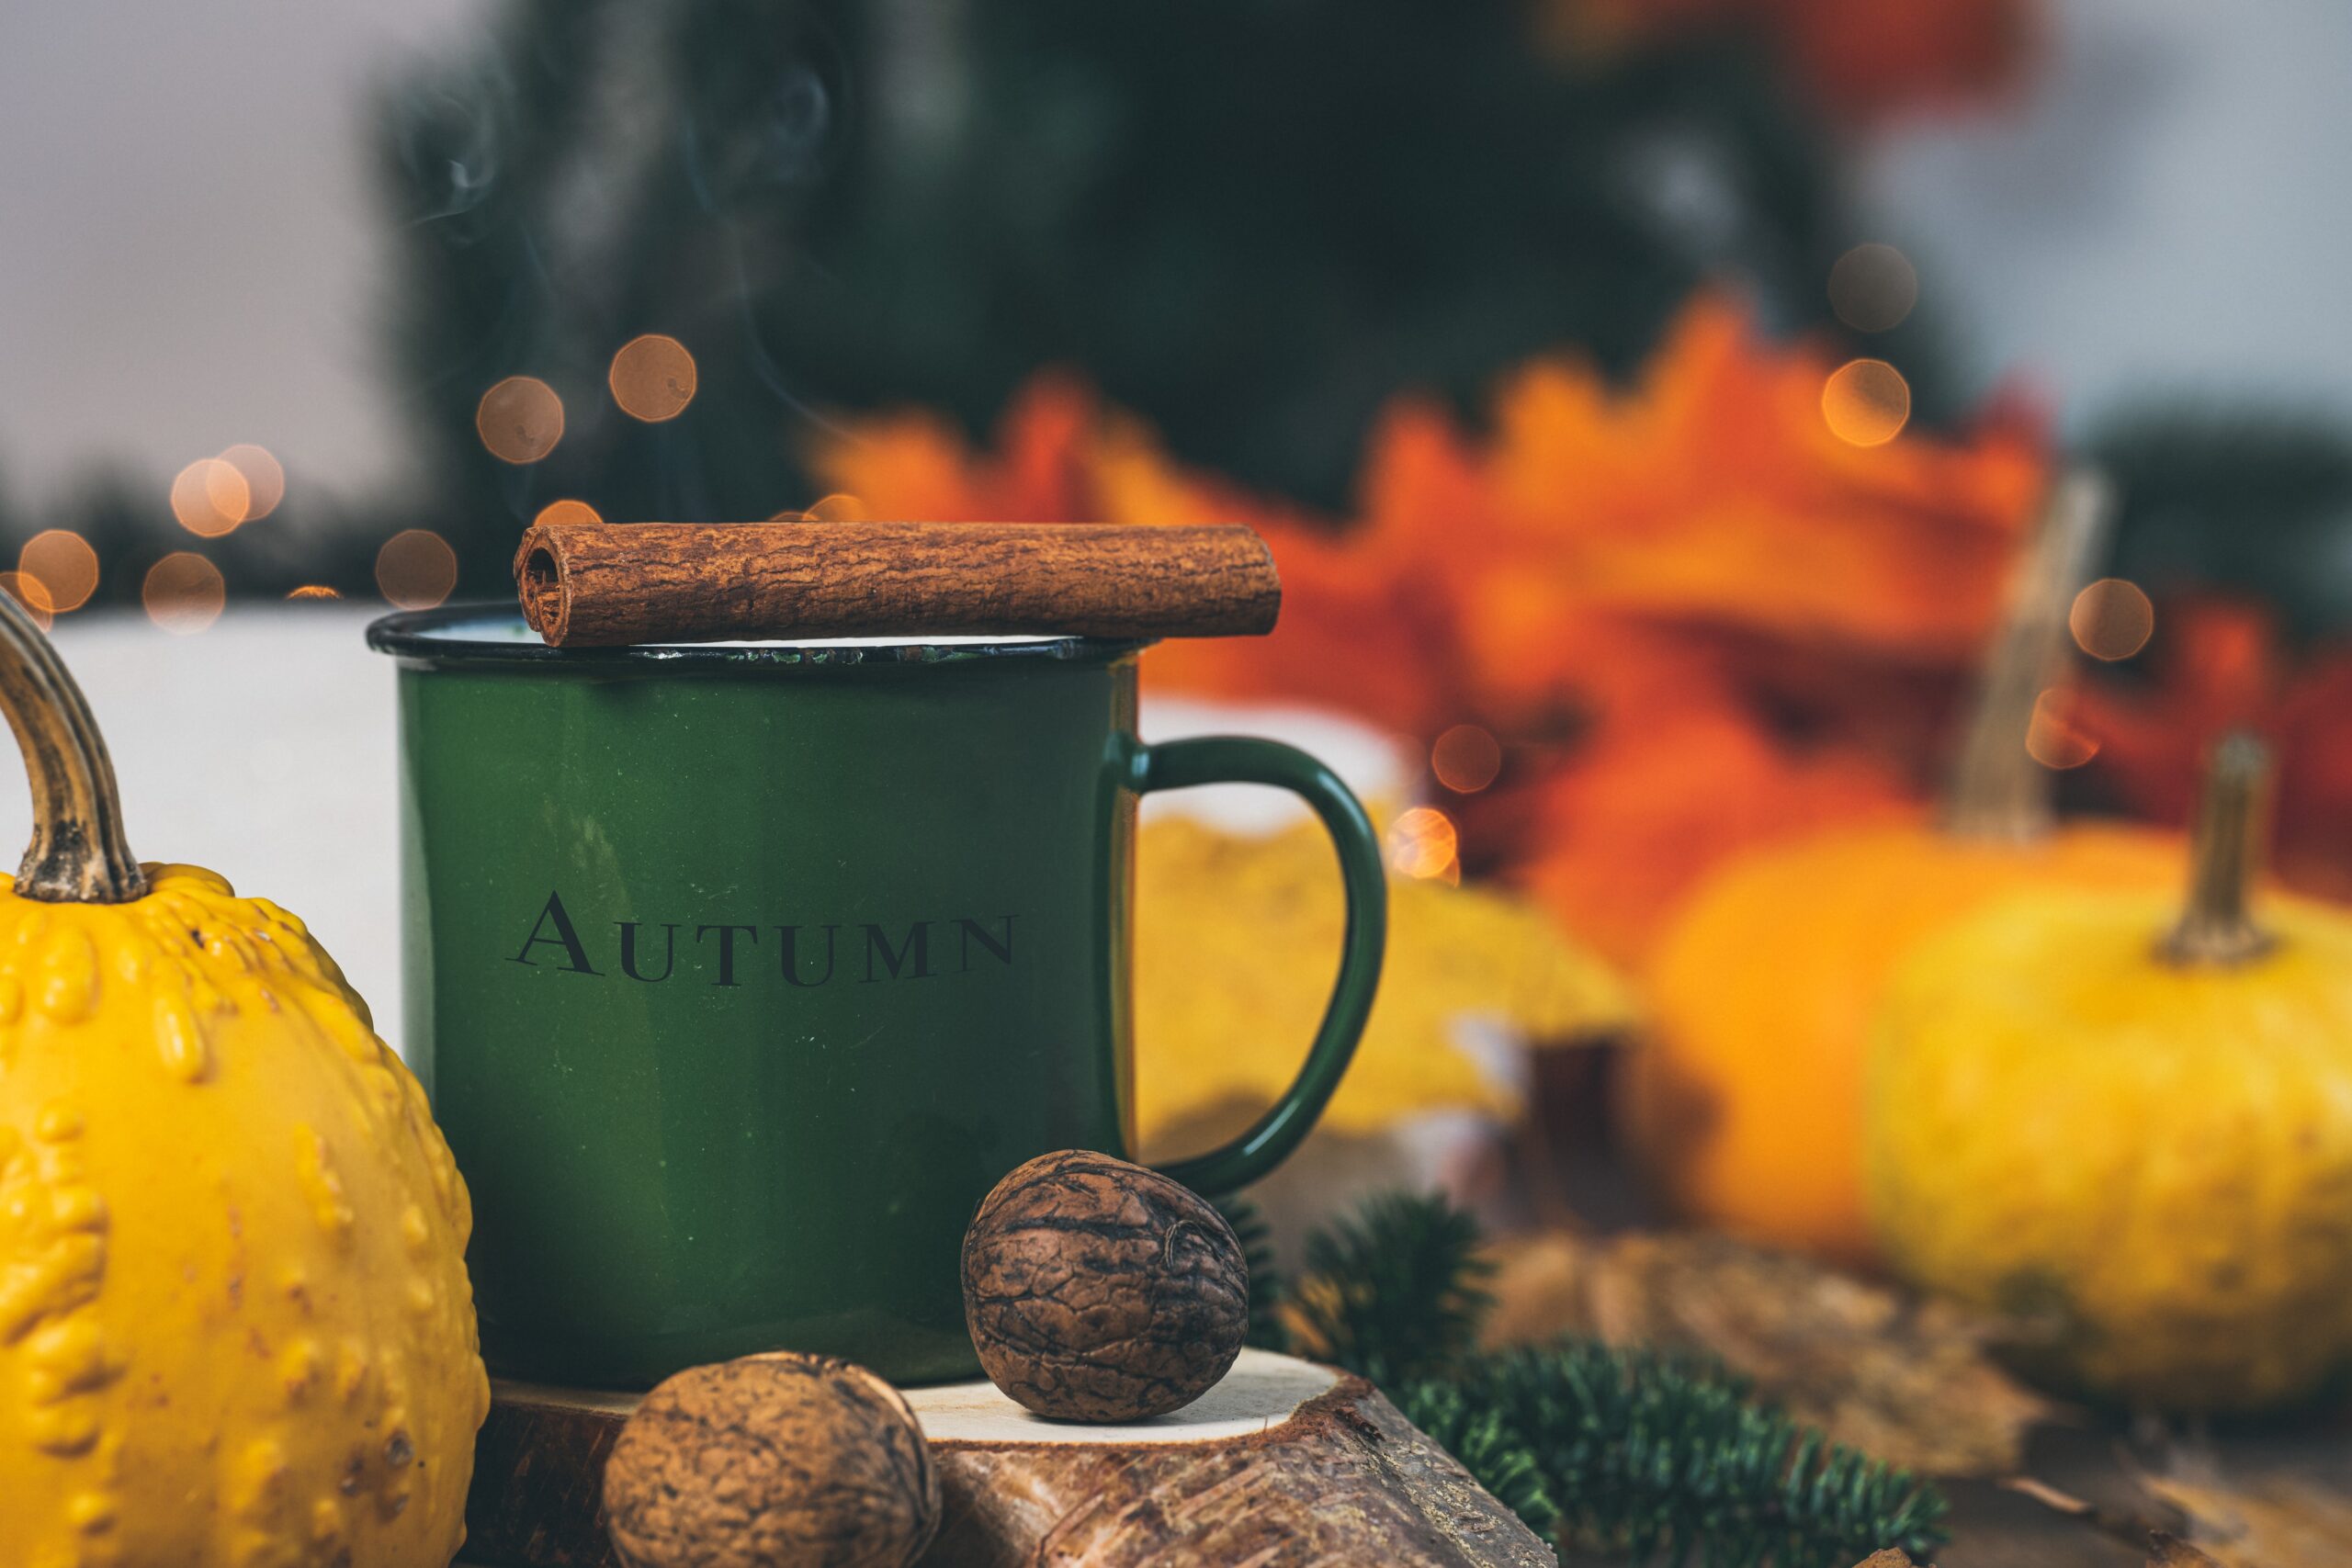 Olive green decorations to include in your deep autumn color palette. Pictured: An olive green autumn mug with fall decorations.